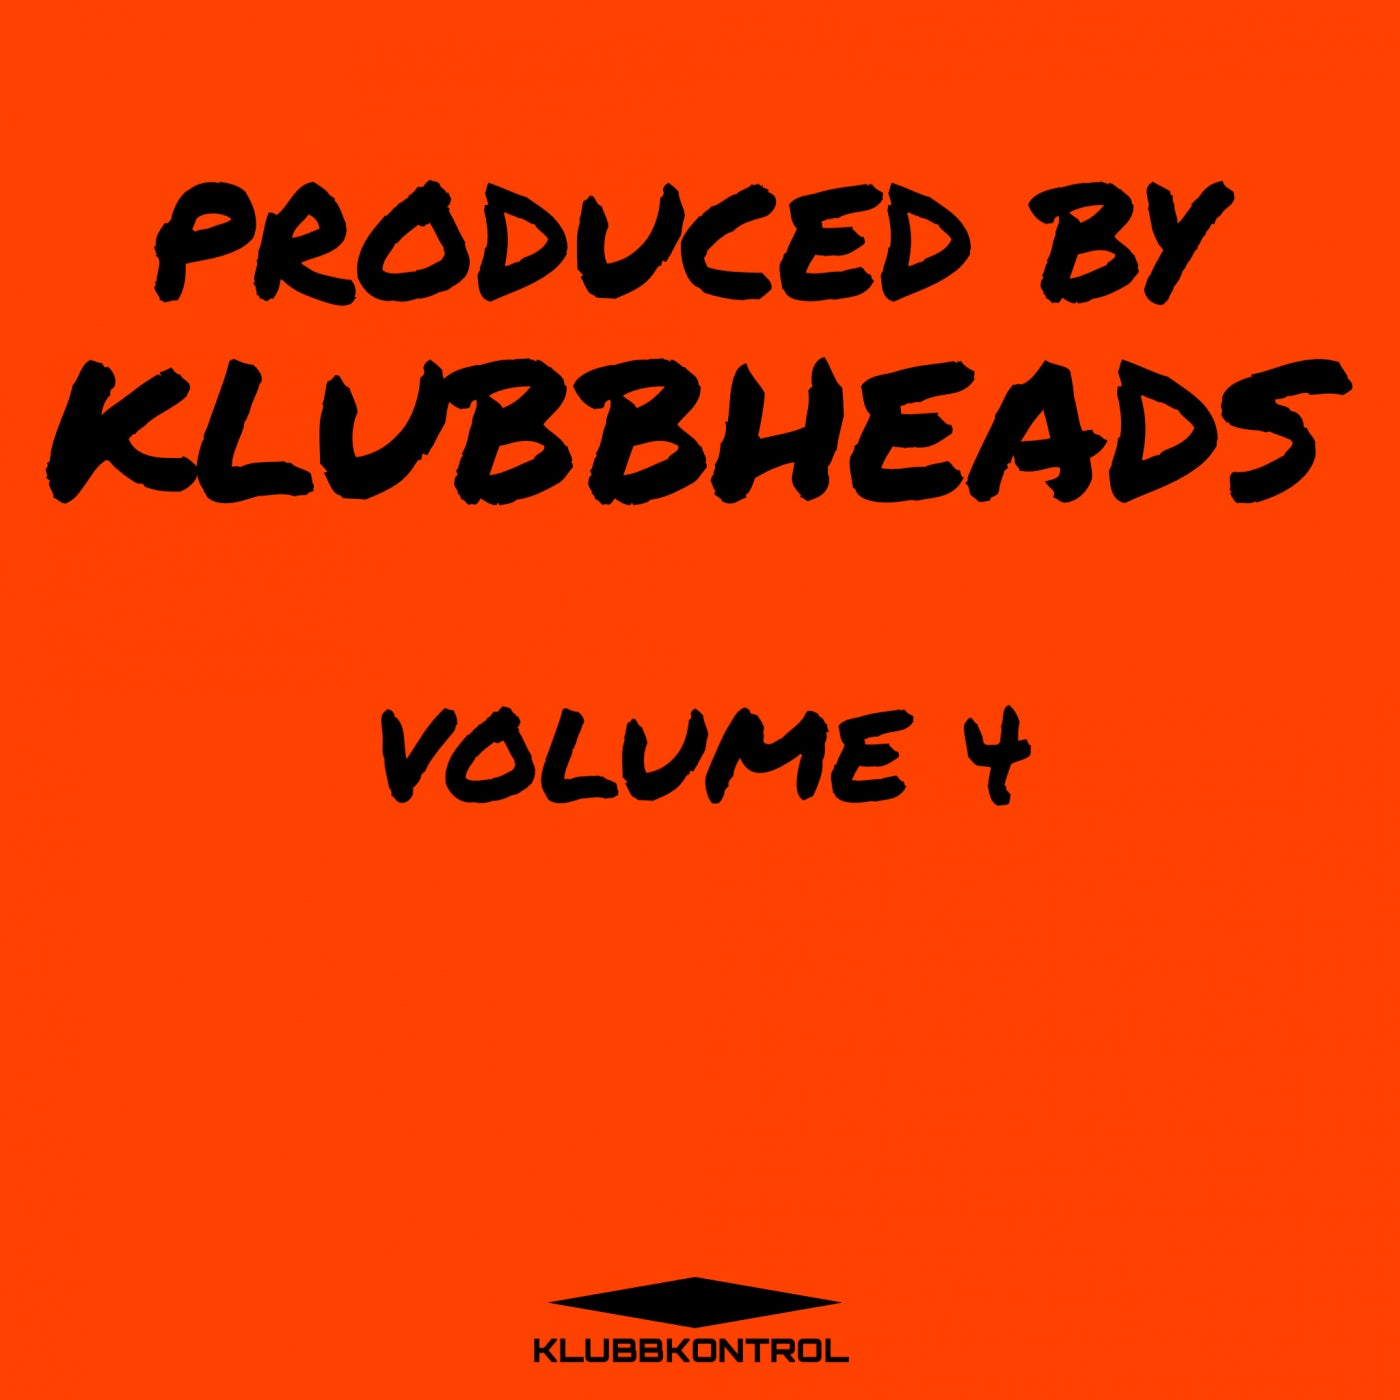 Produced By Klubbheads, Vol. 4